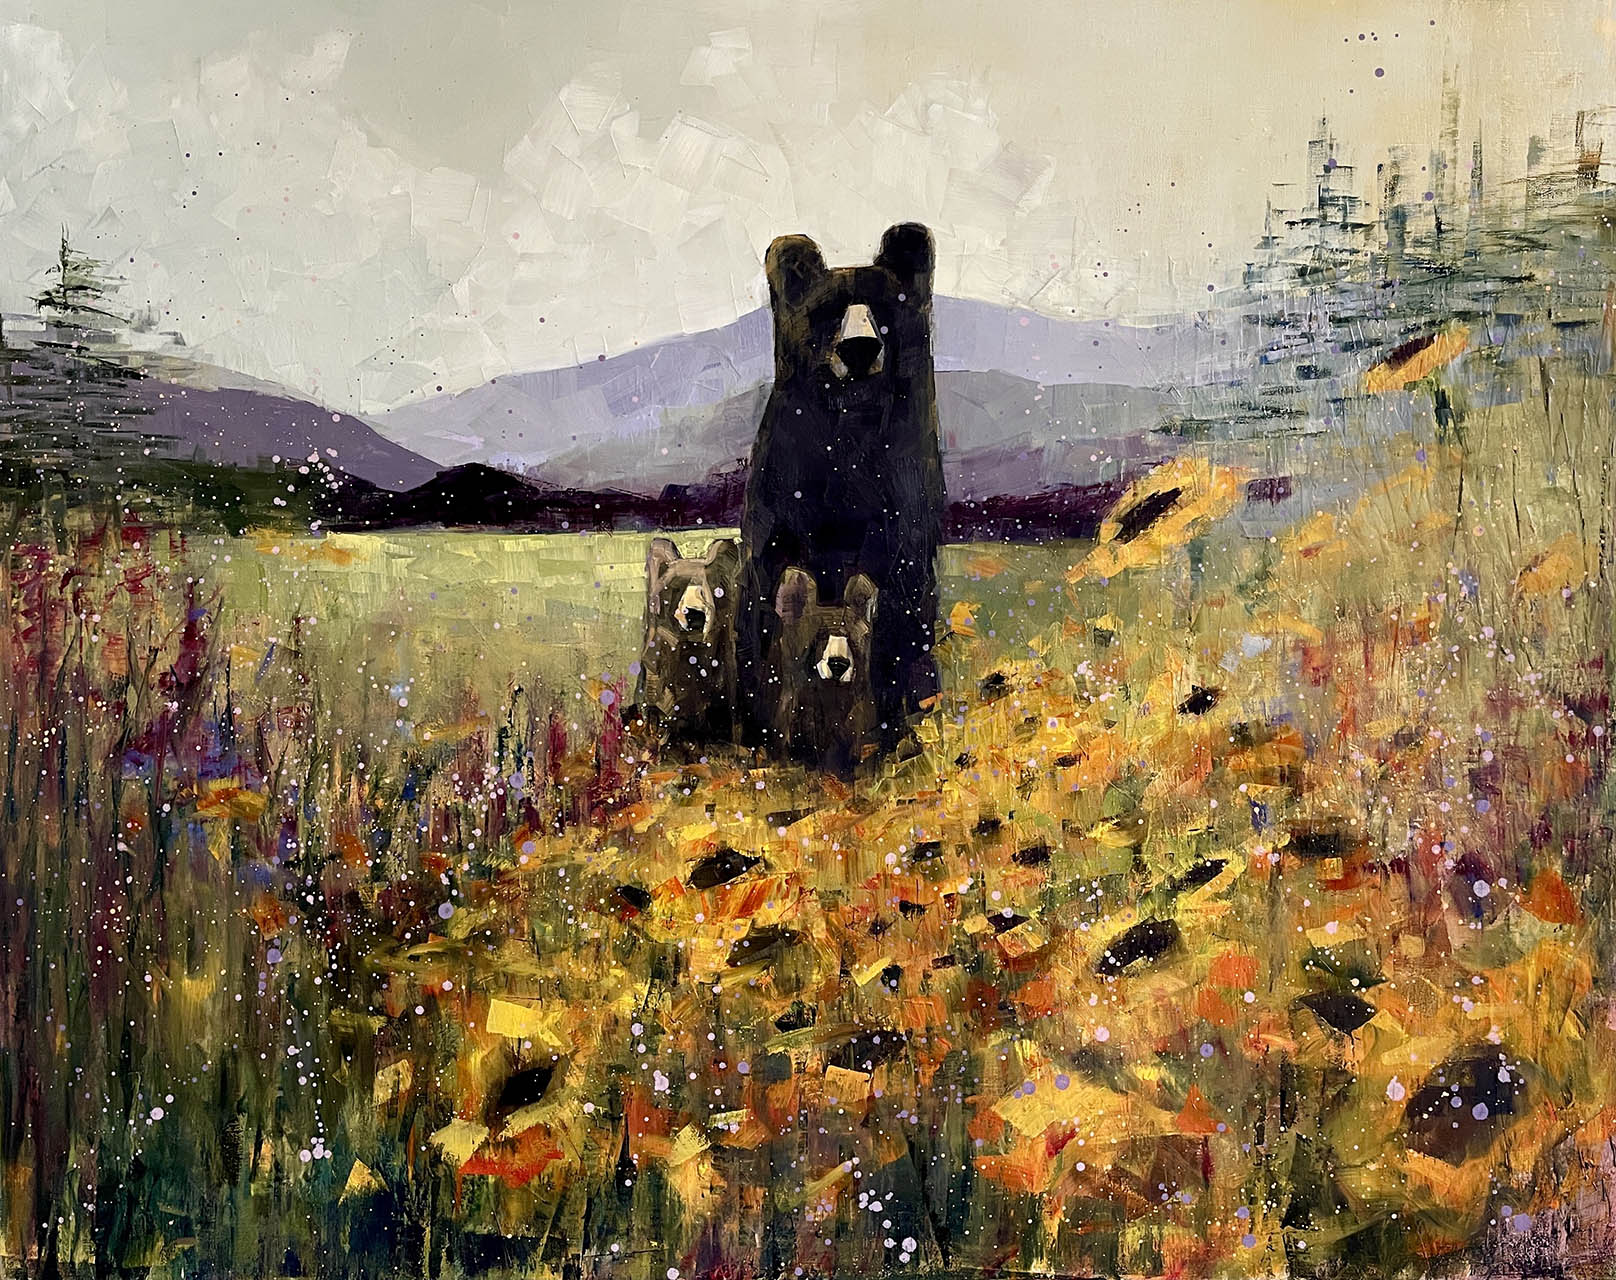 Black Bear with Cubs (Sunflowers)